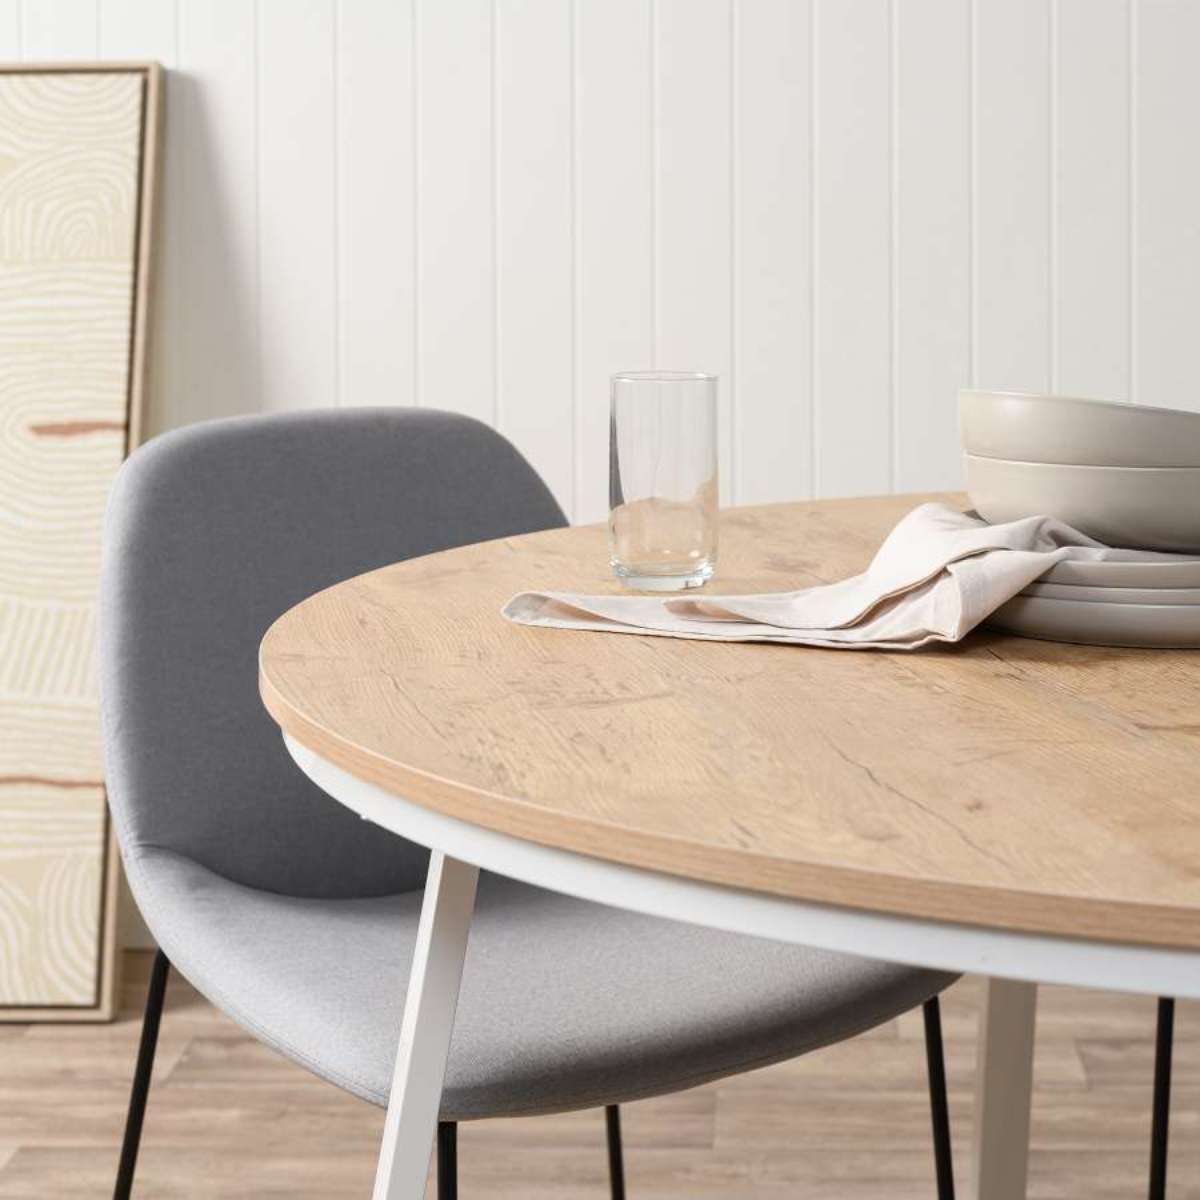 Reese 4 Seater Dining Table - White